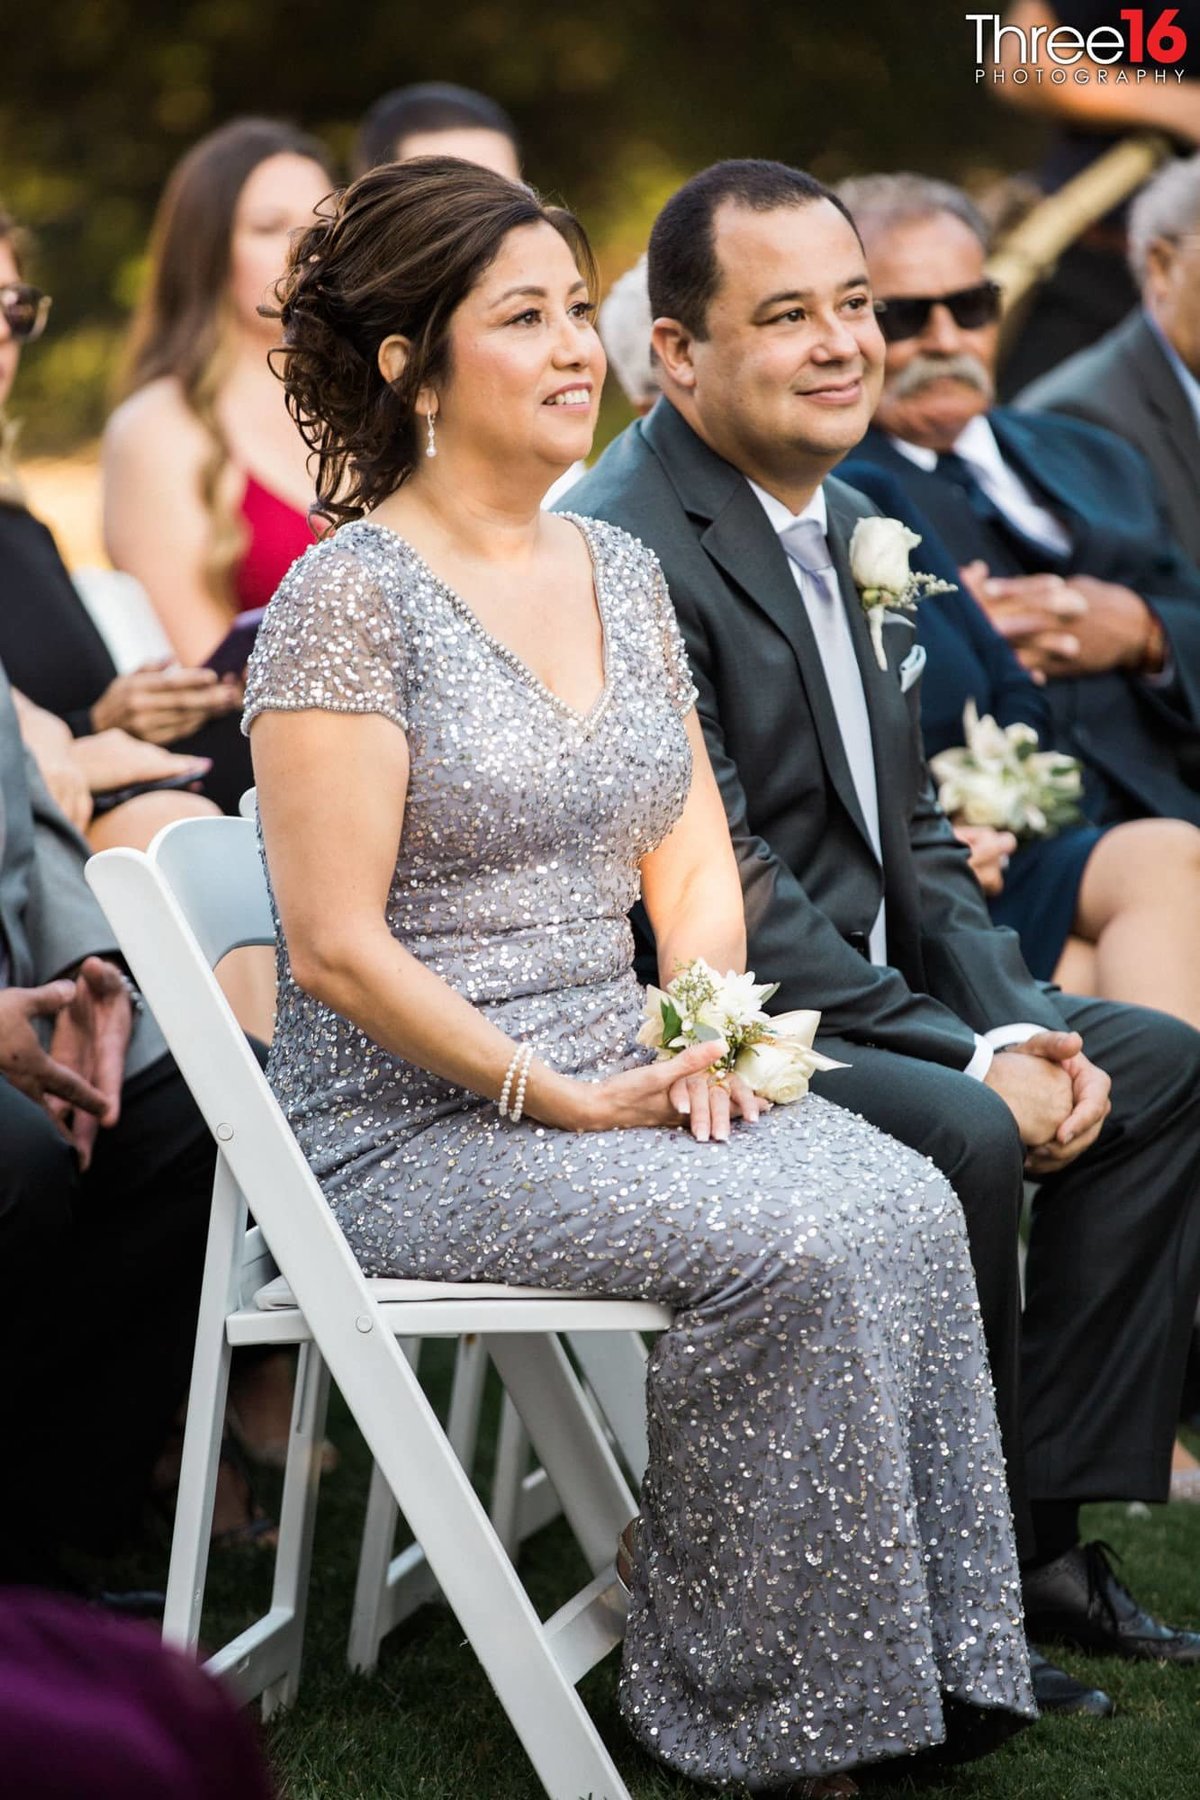 Parents of the Bride watch their daughter get married